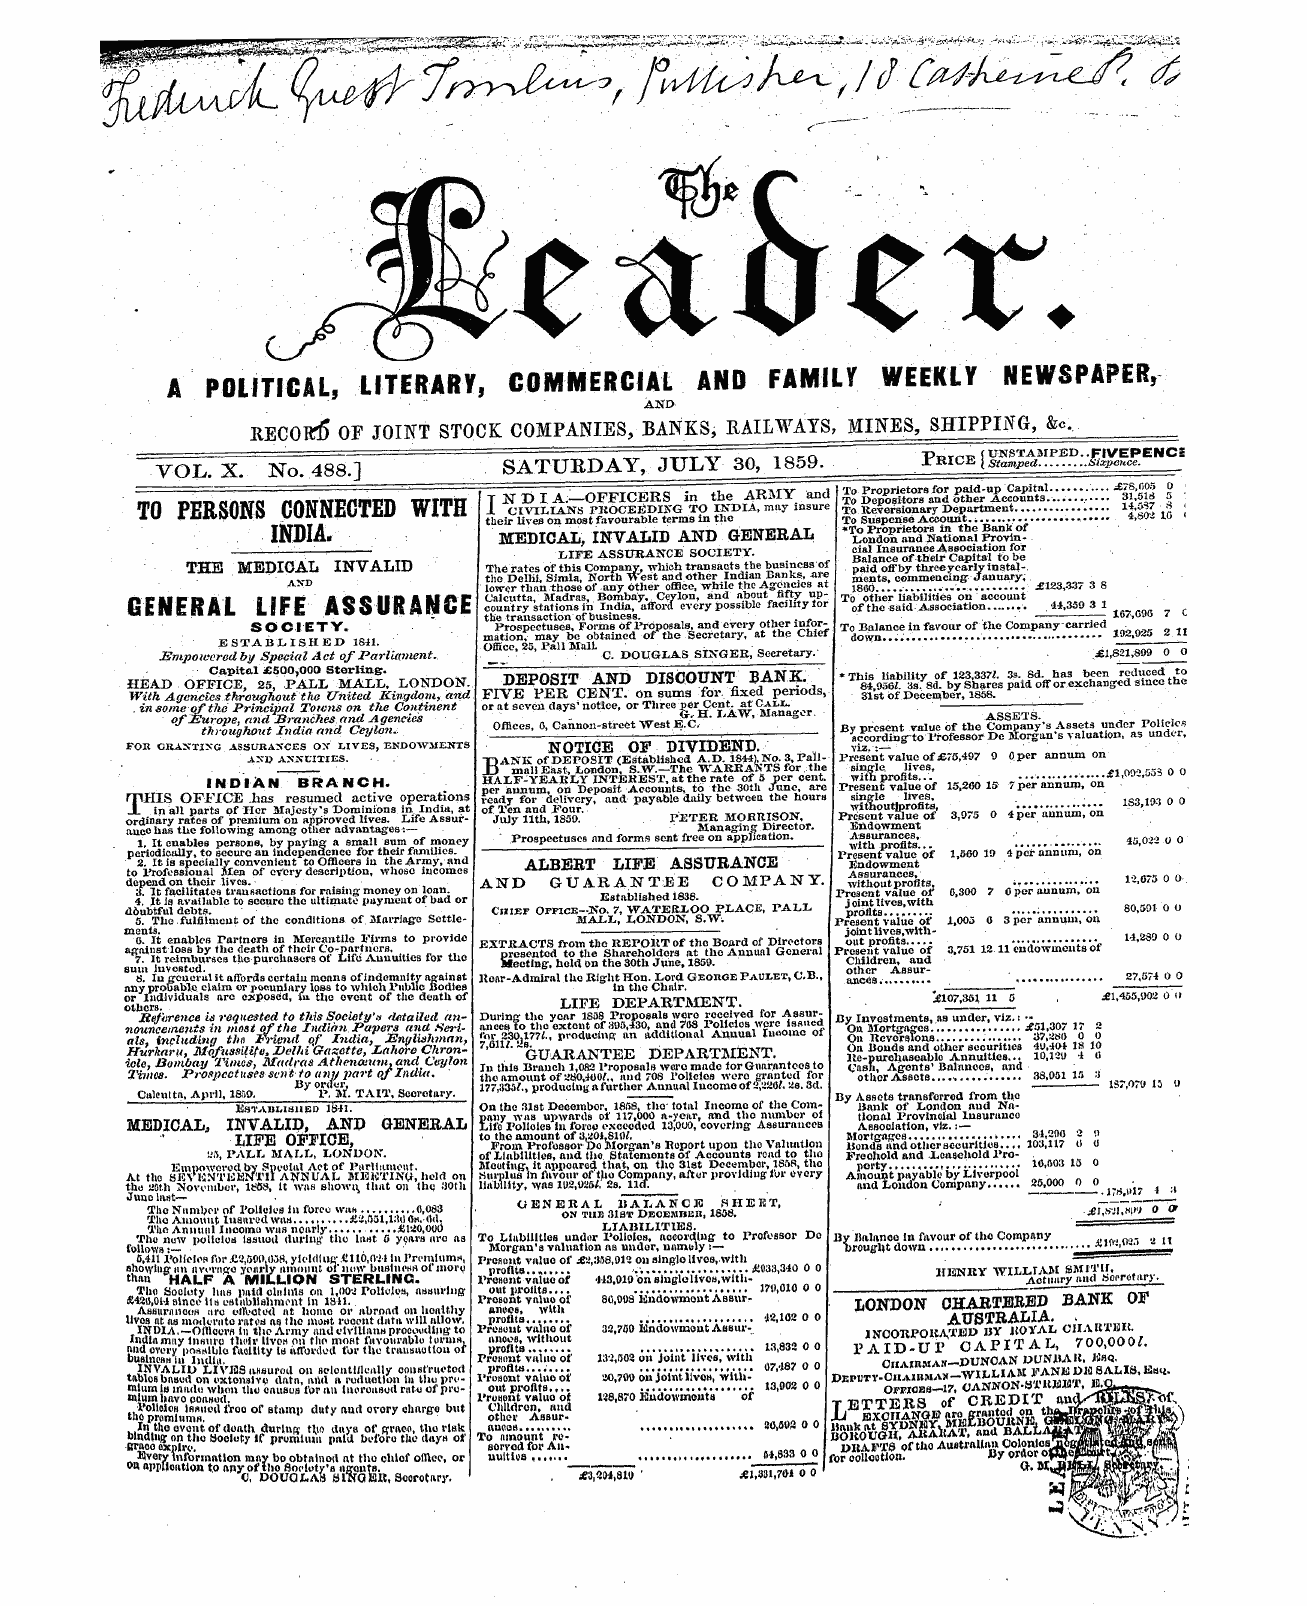 Leader (1850-1860): jS F Y, 2nd edition - Ad00107